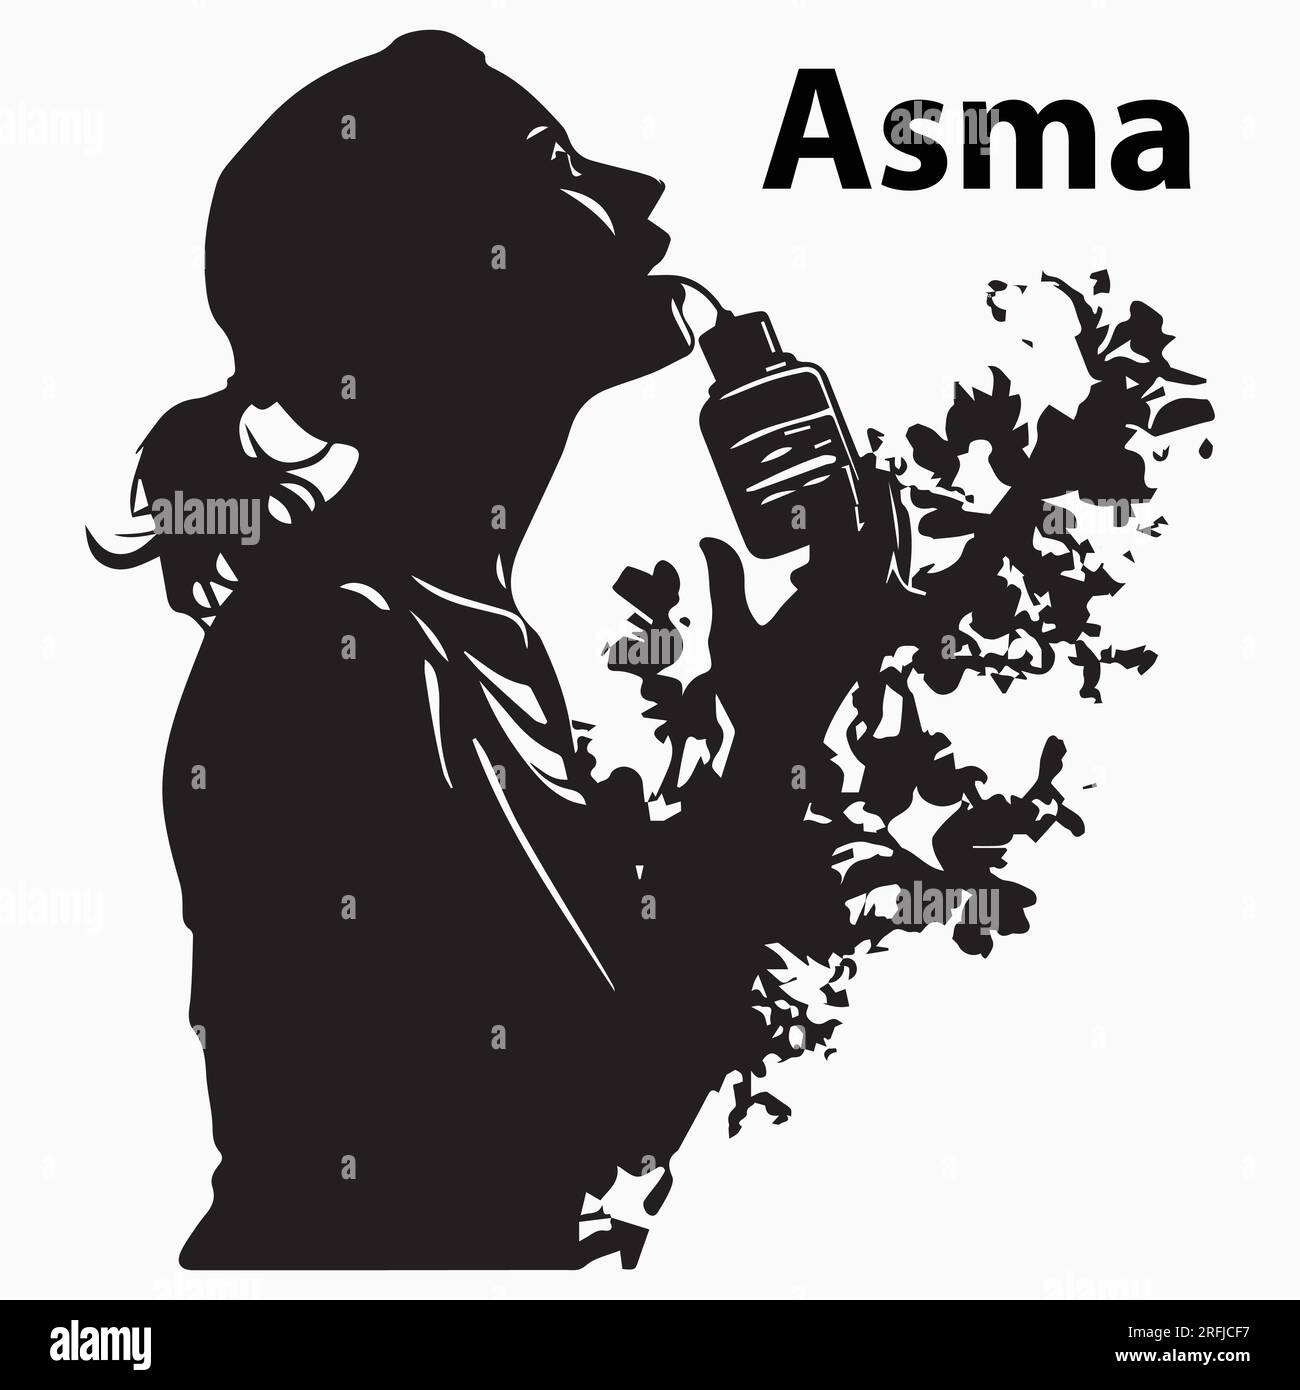 Asthma Affected Girl silhouette vector illustration Stock Vector